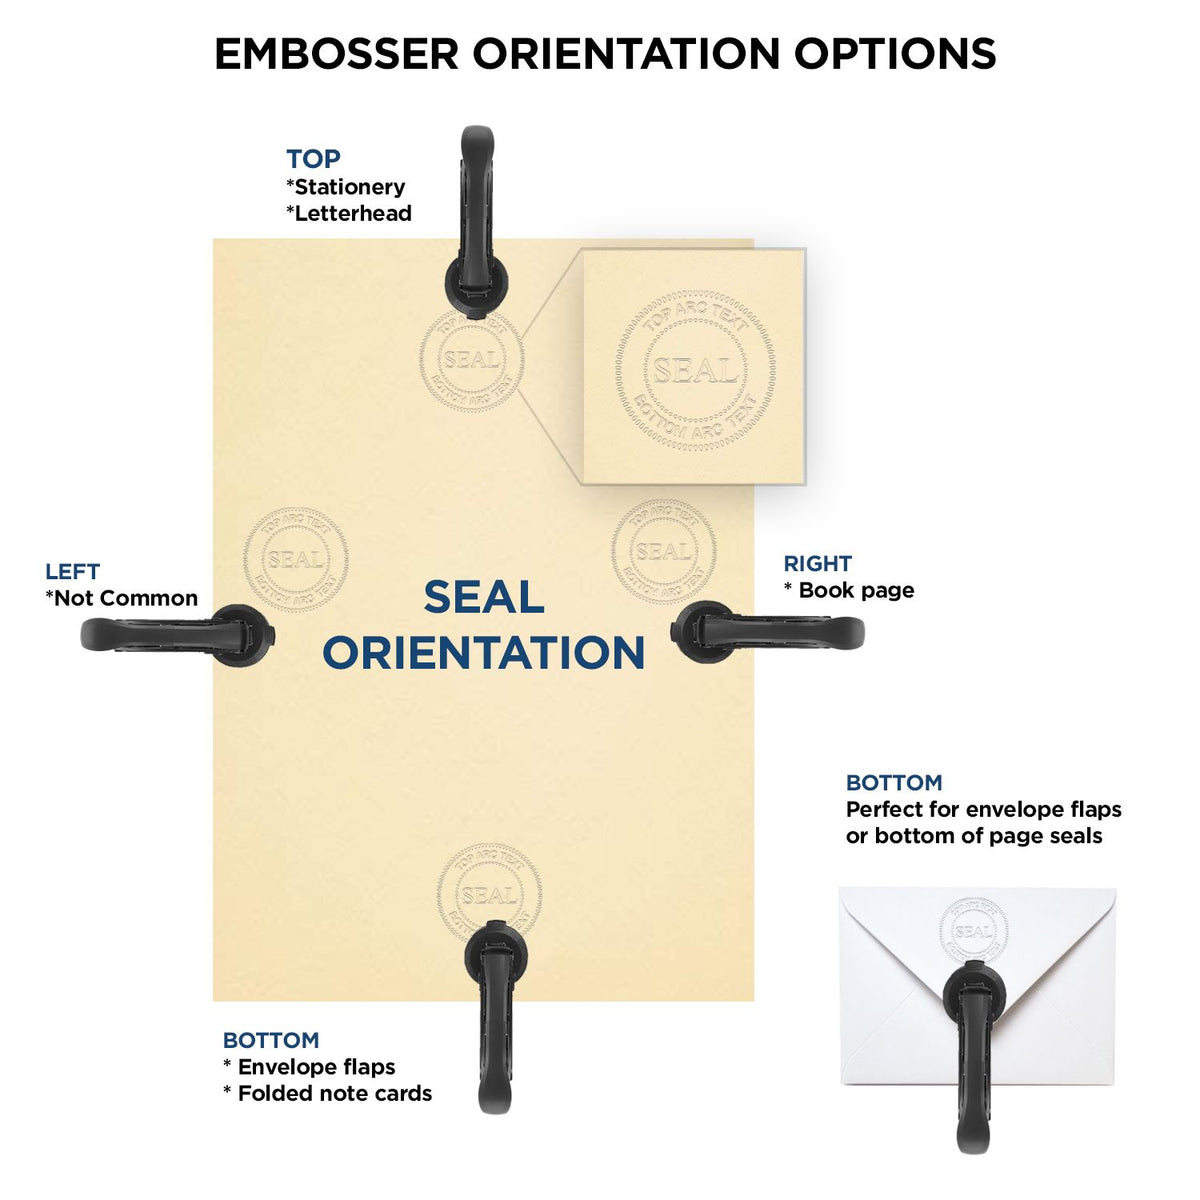 An infographic for the Heavy Duty Cast Iron Georgia Architect Embosser showing embosser orientation, this is showing examples of a top, bottom, right and left insert.